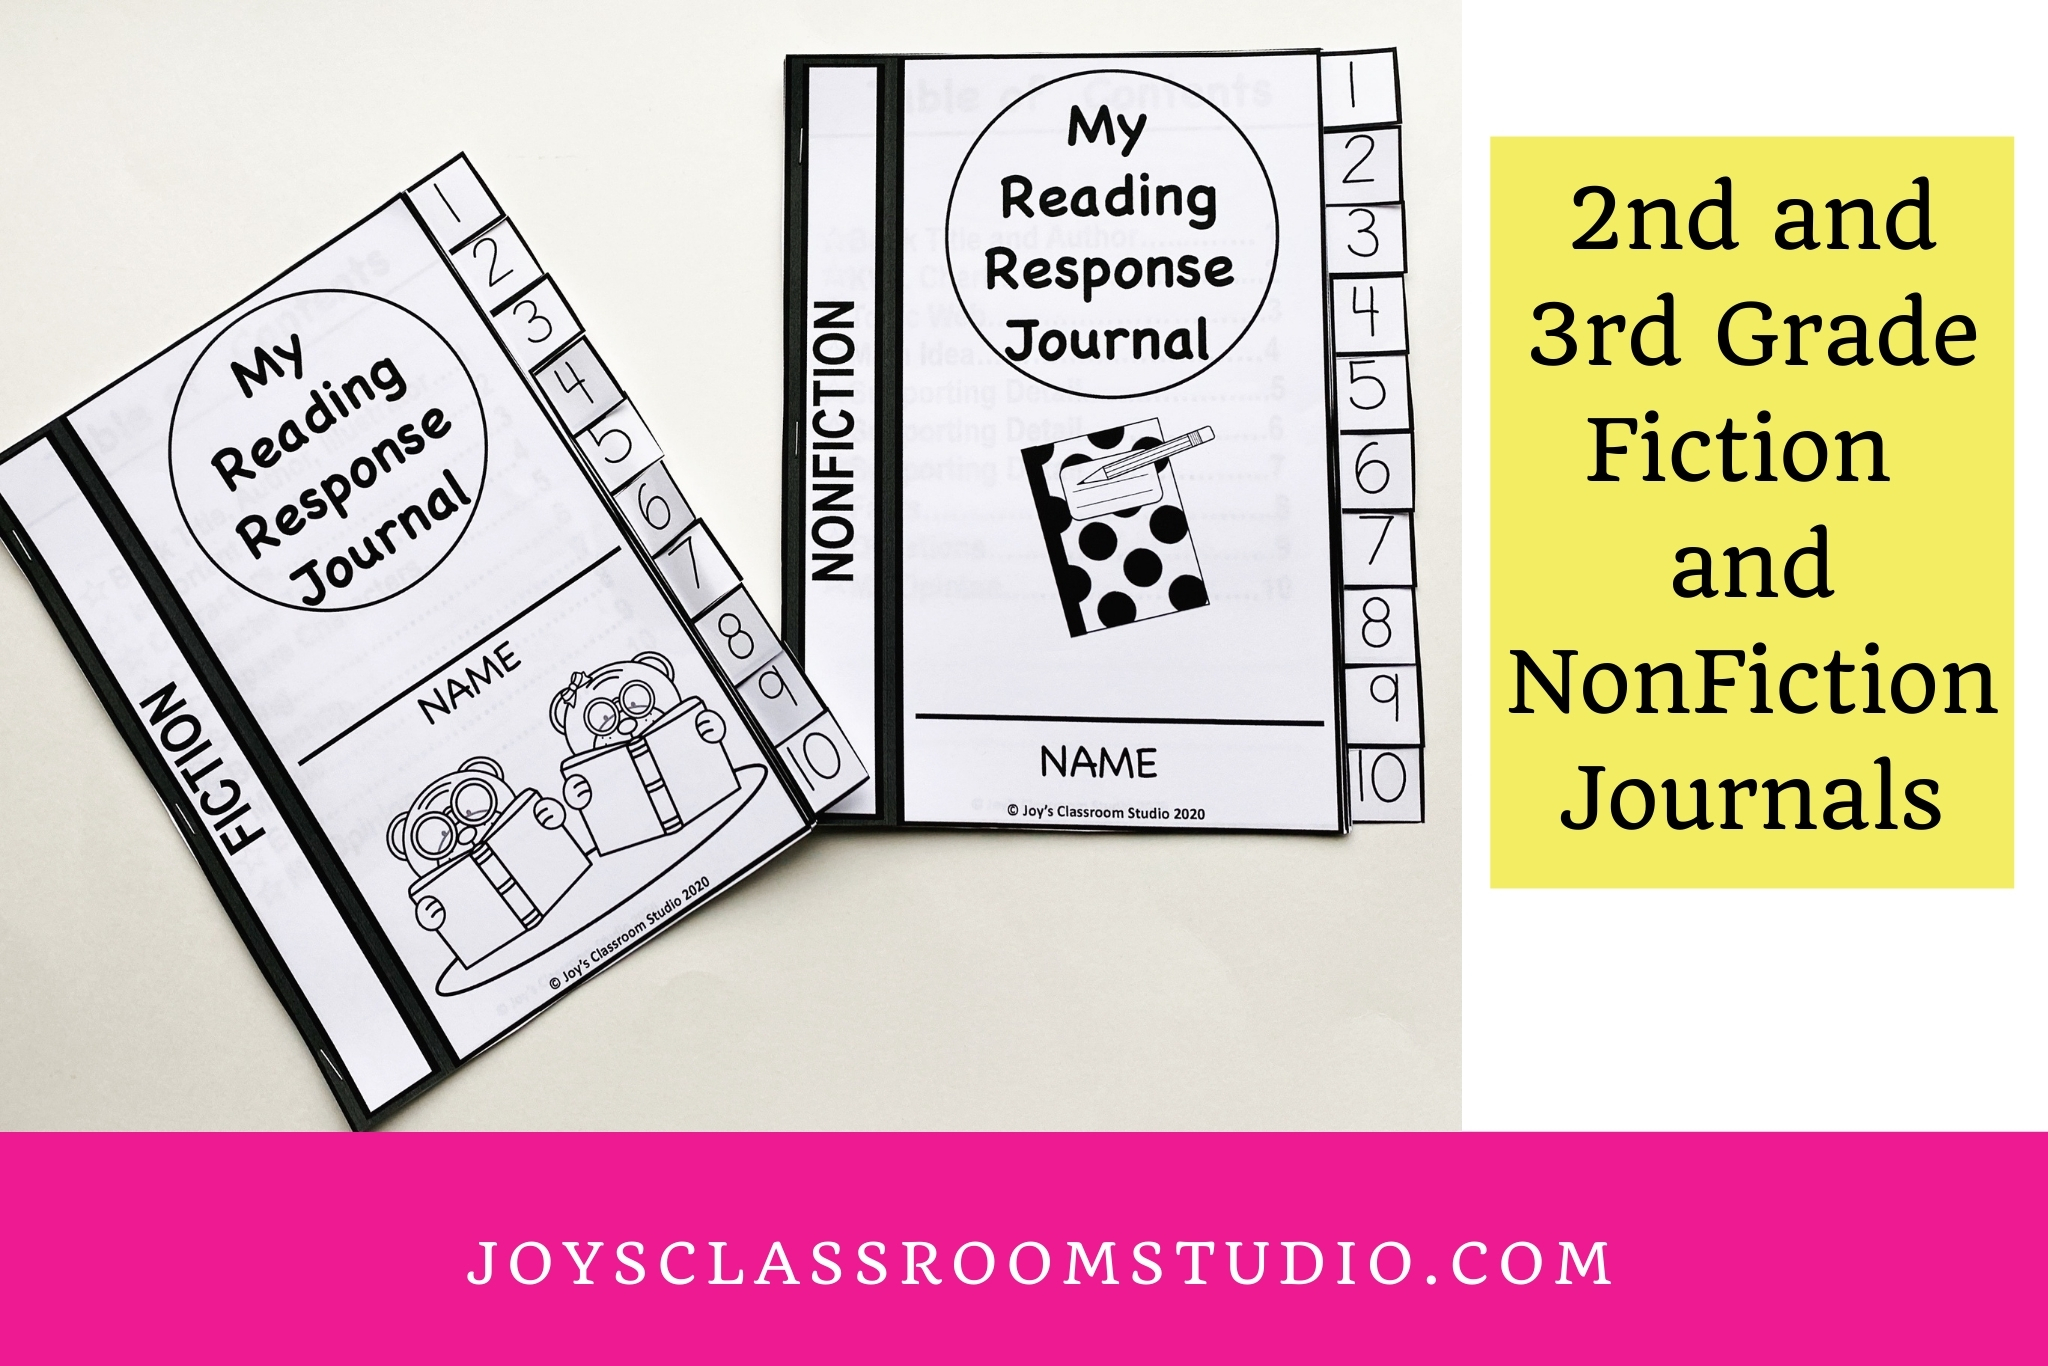 2nd and 3rd grade fiction and nonfiction journals